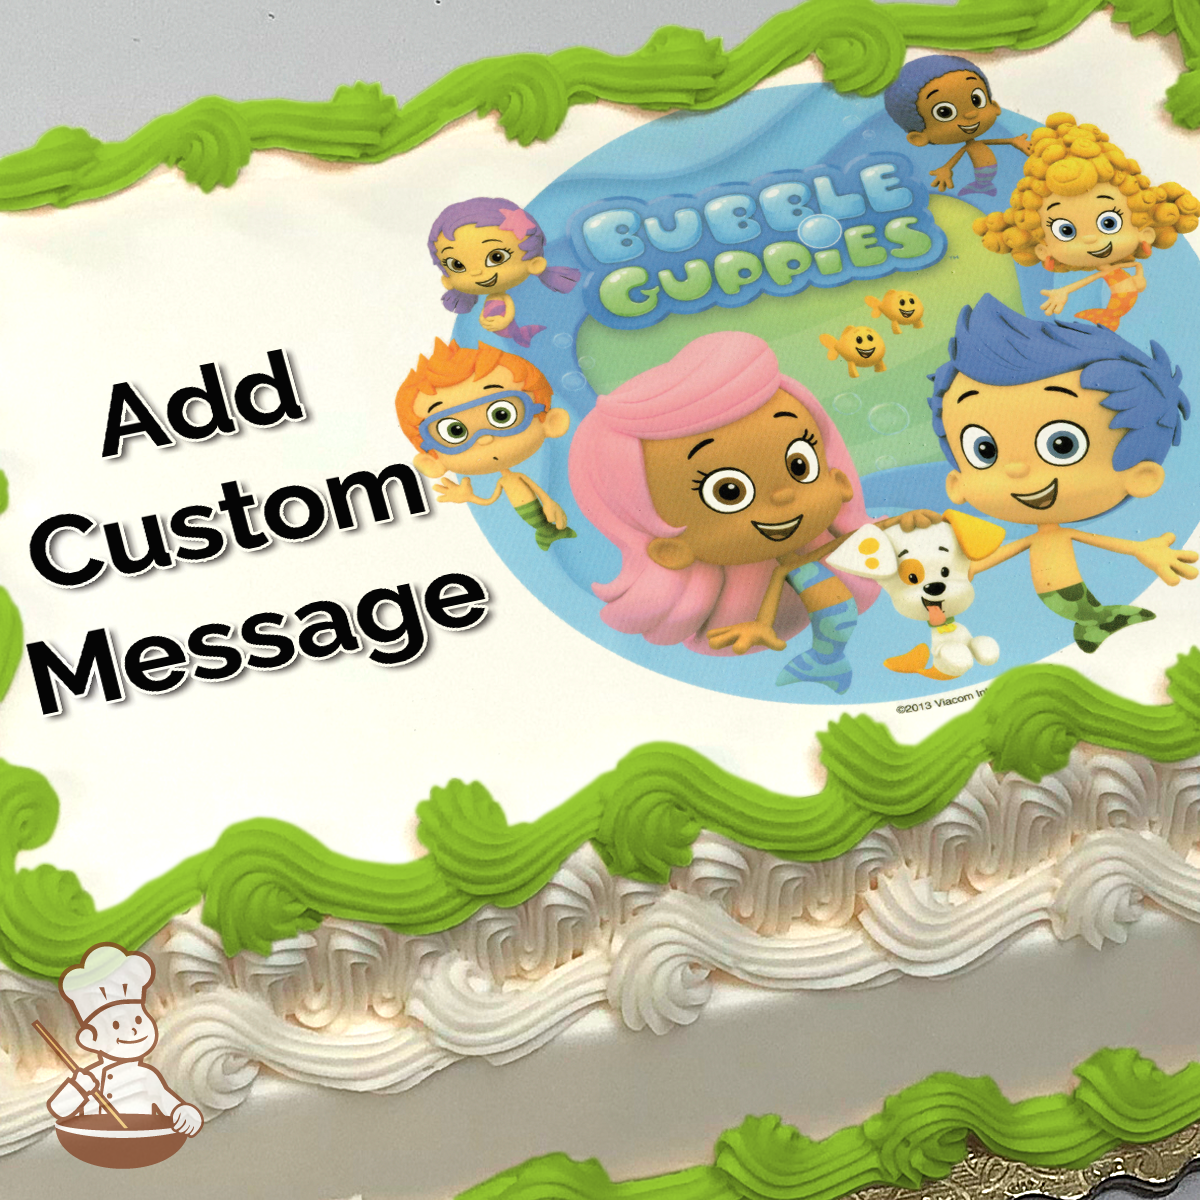 Bubble Guppies Birthday Party Ideas | Photo 7 of 22 | Catch My Party